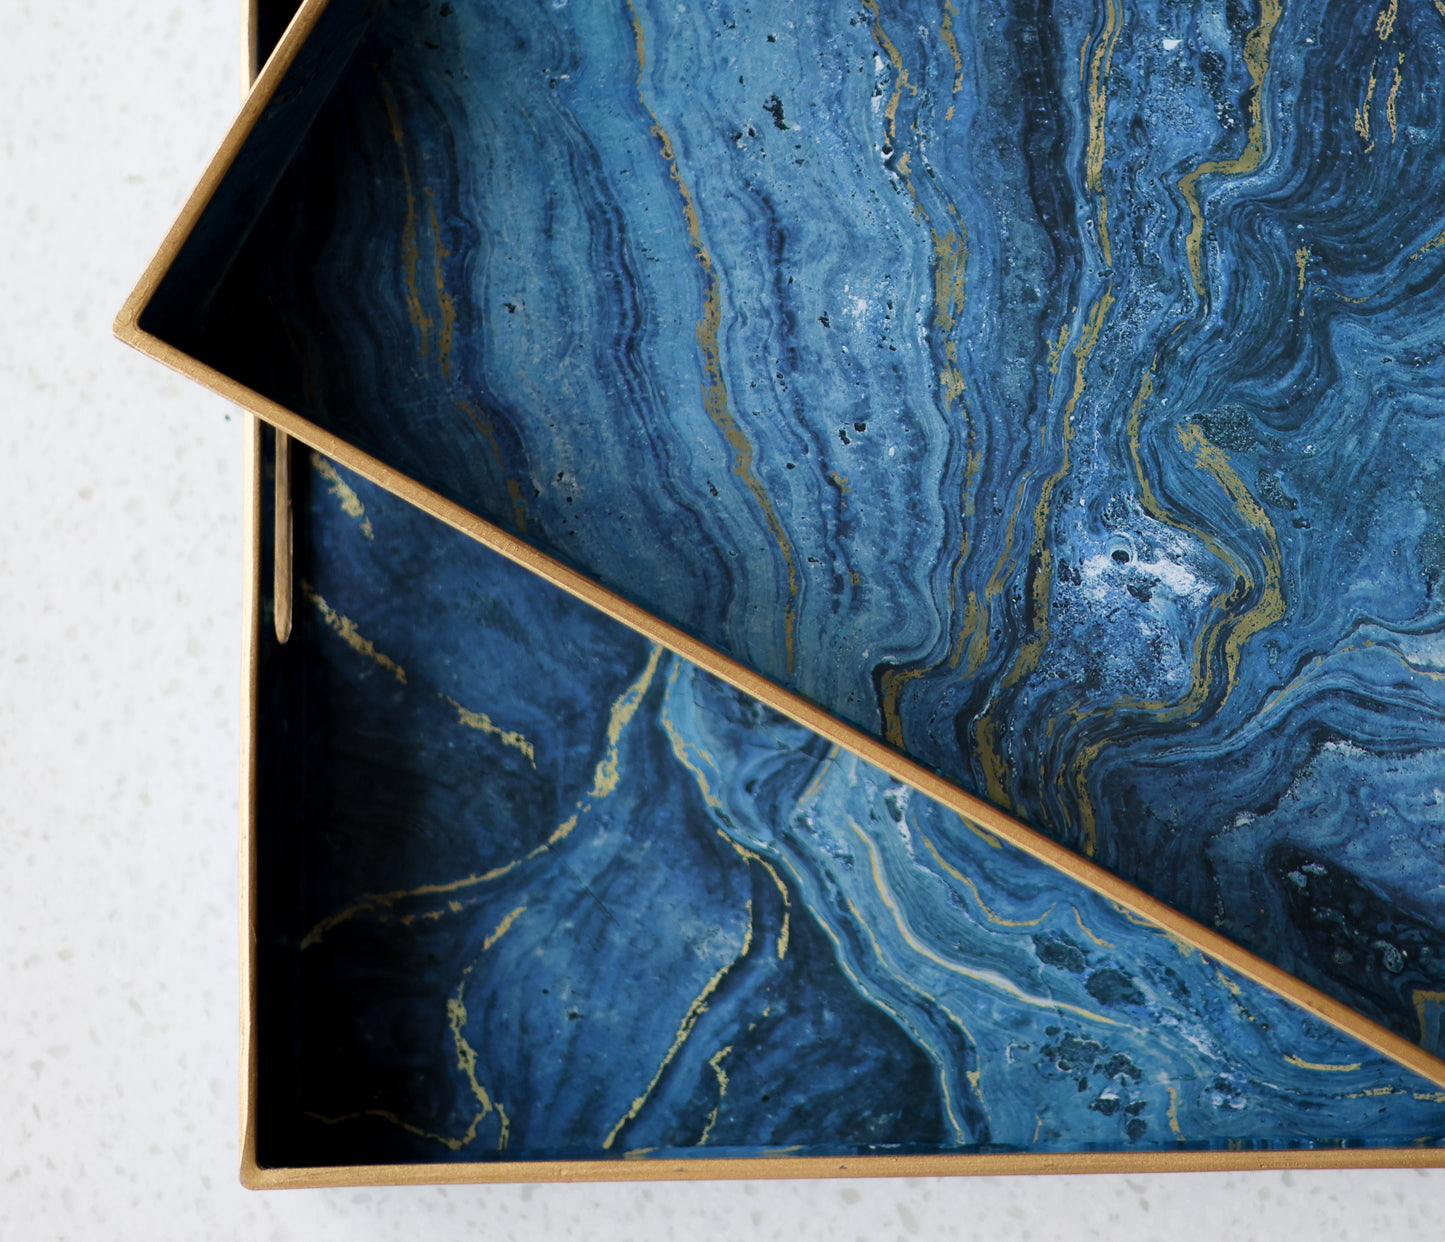 Set of 2 Blue marble effect trays